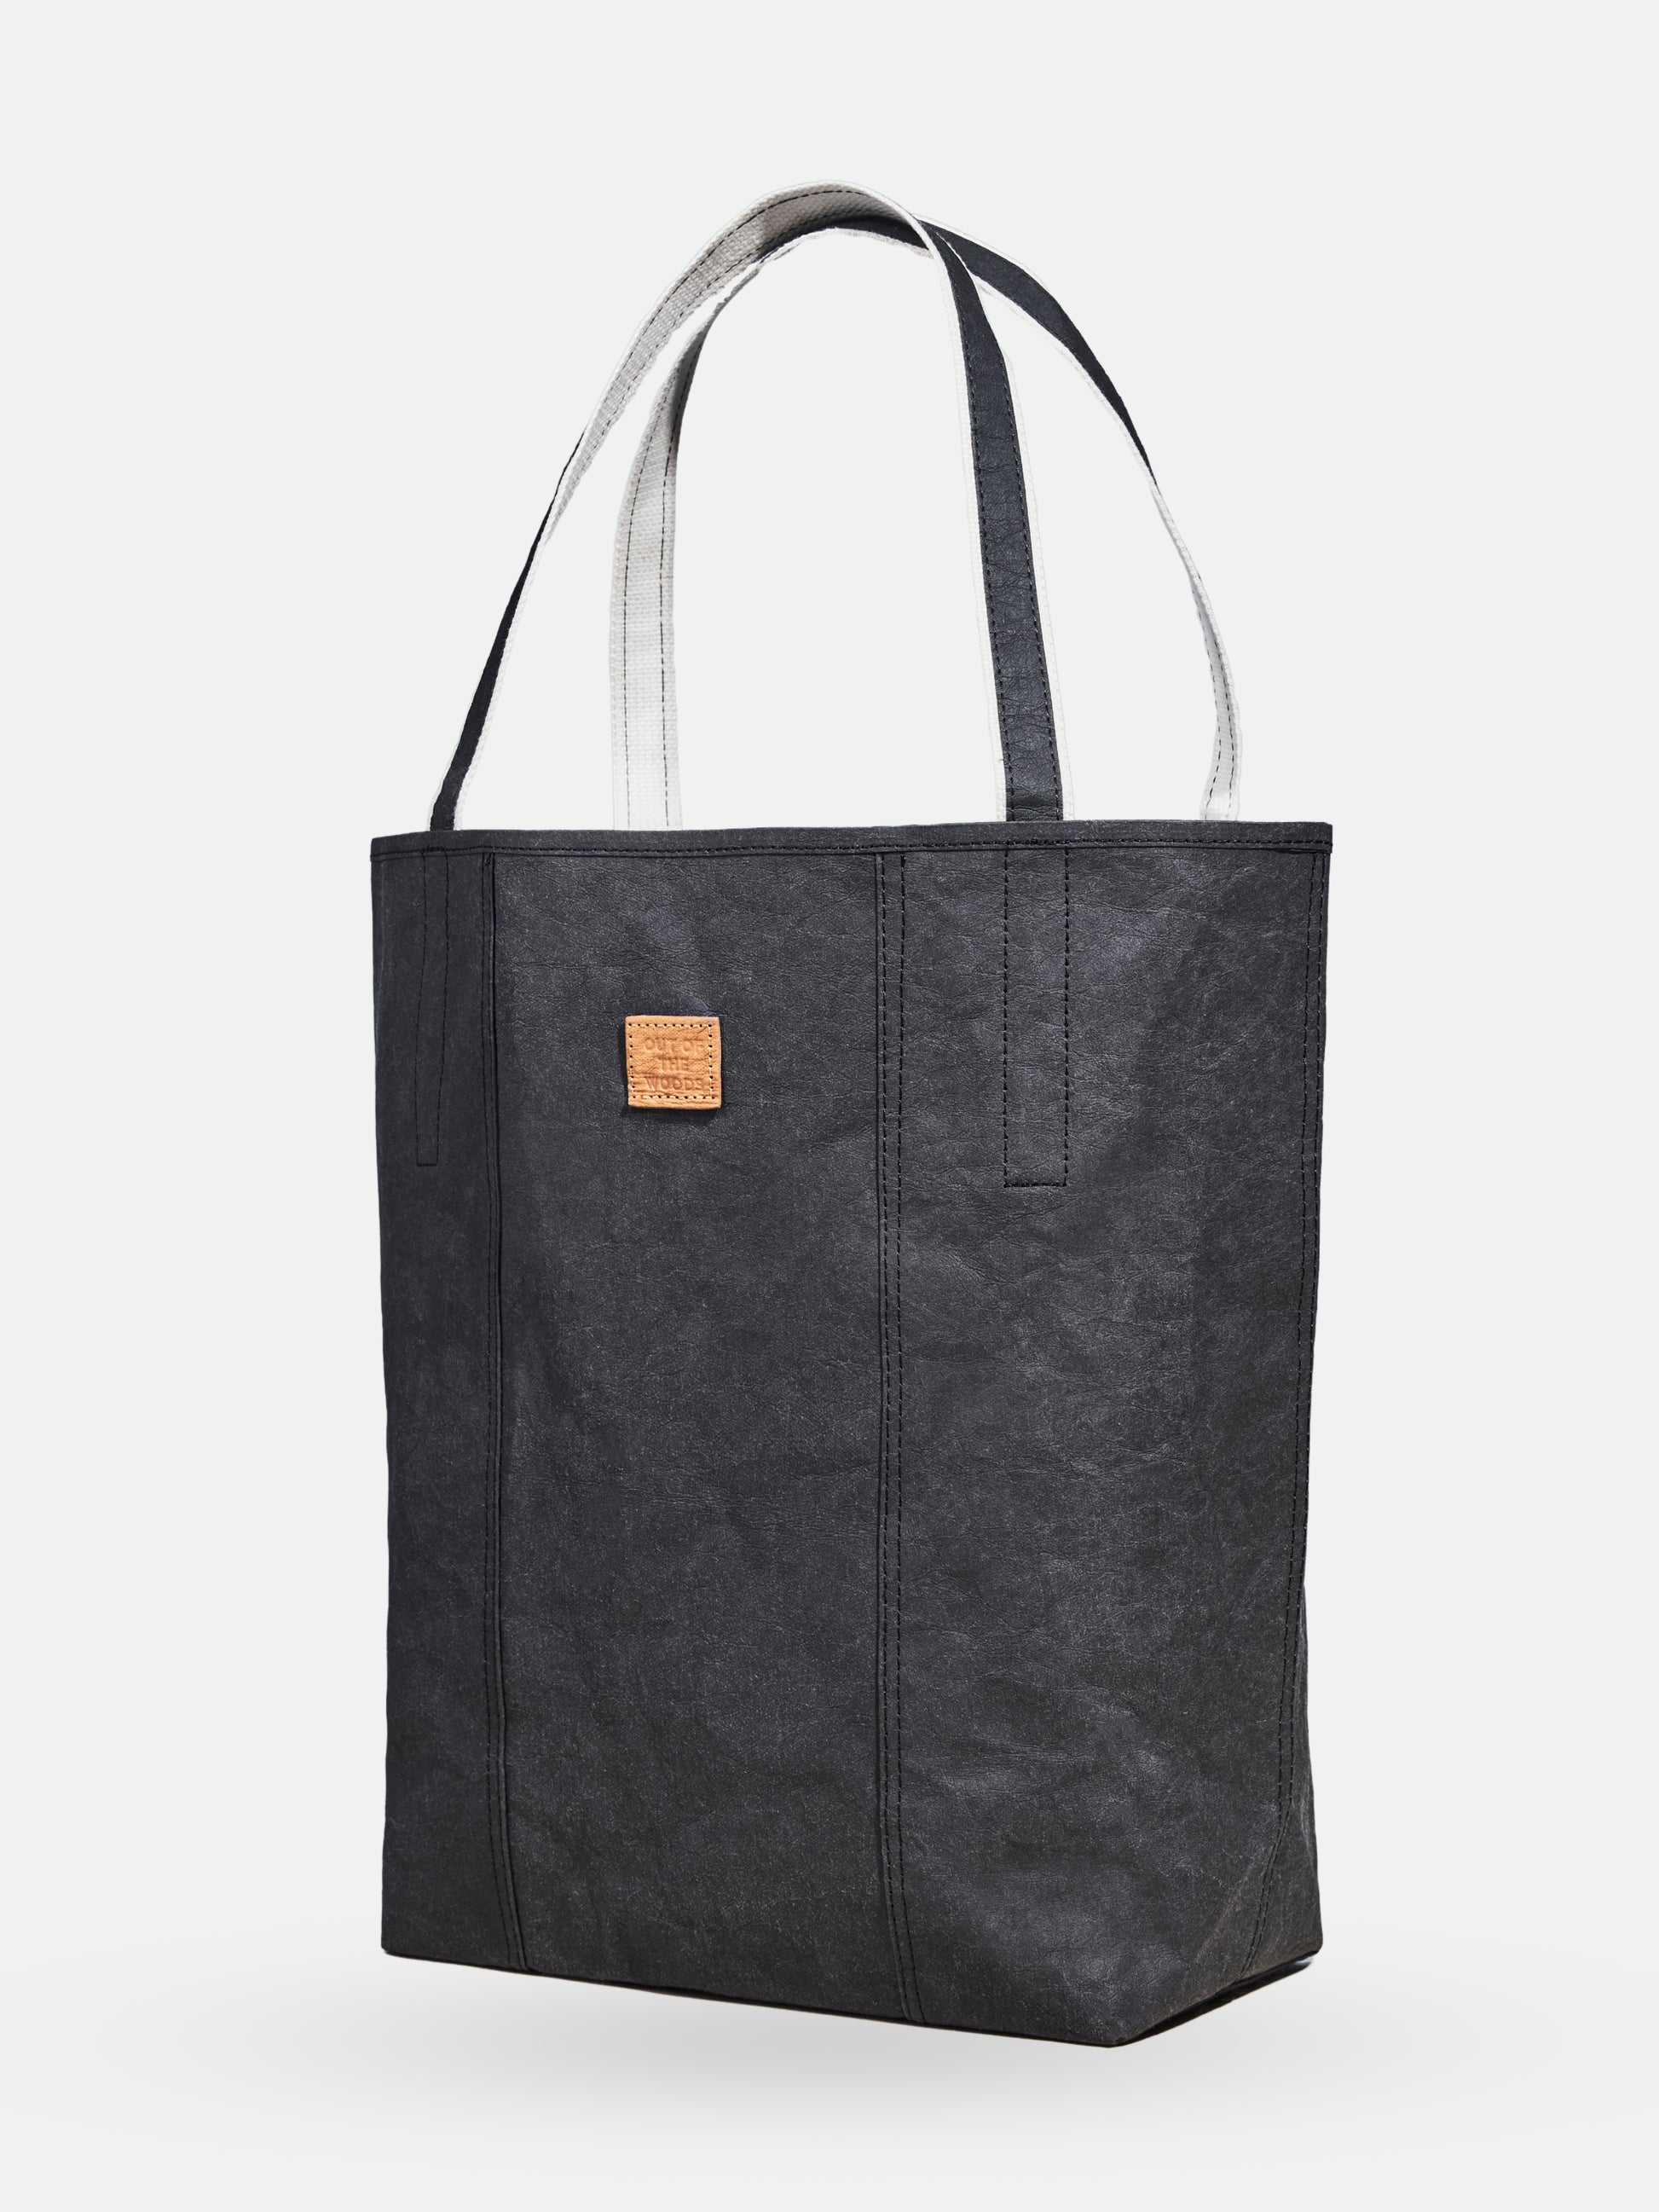 Vegan Grocery Bag Shopper | Sustainable Washable Reusable Tote | Out of ...